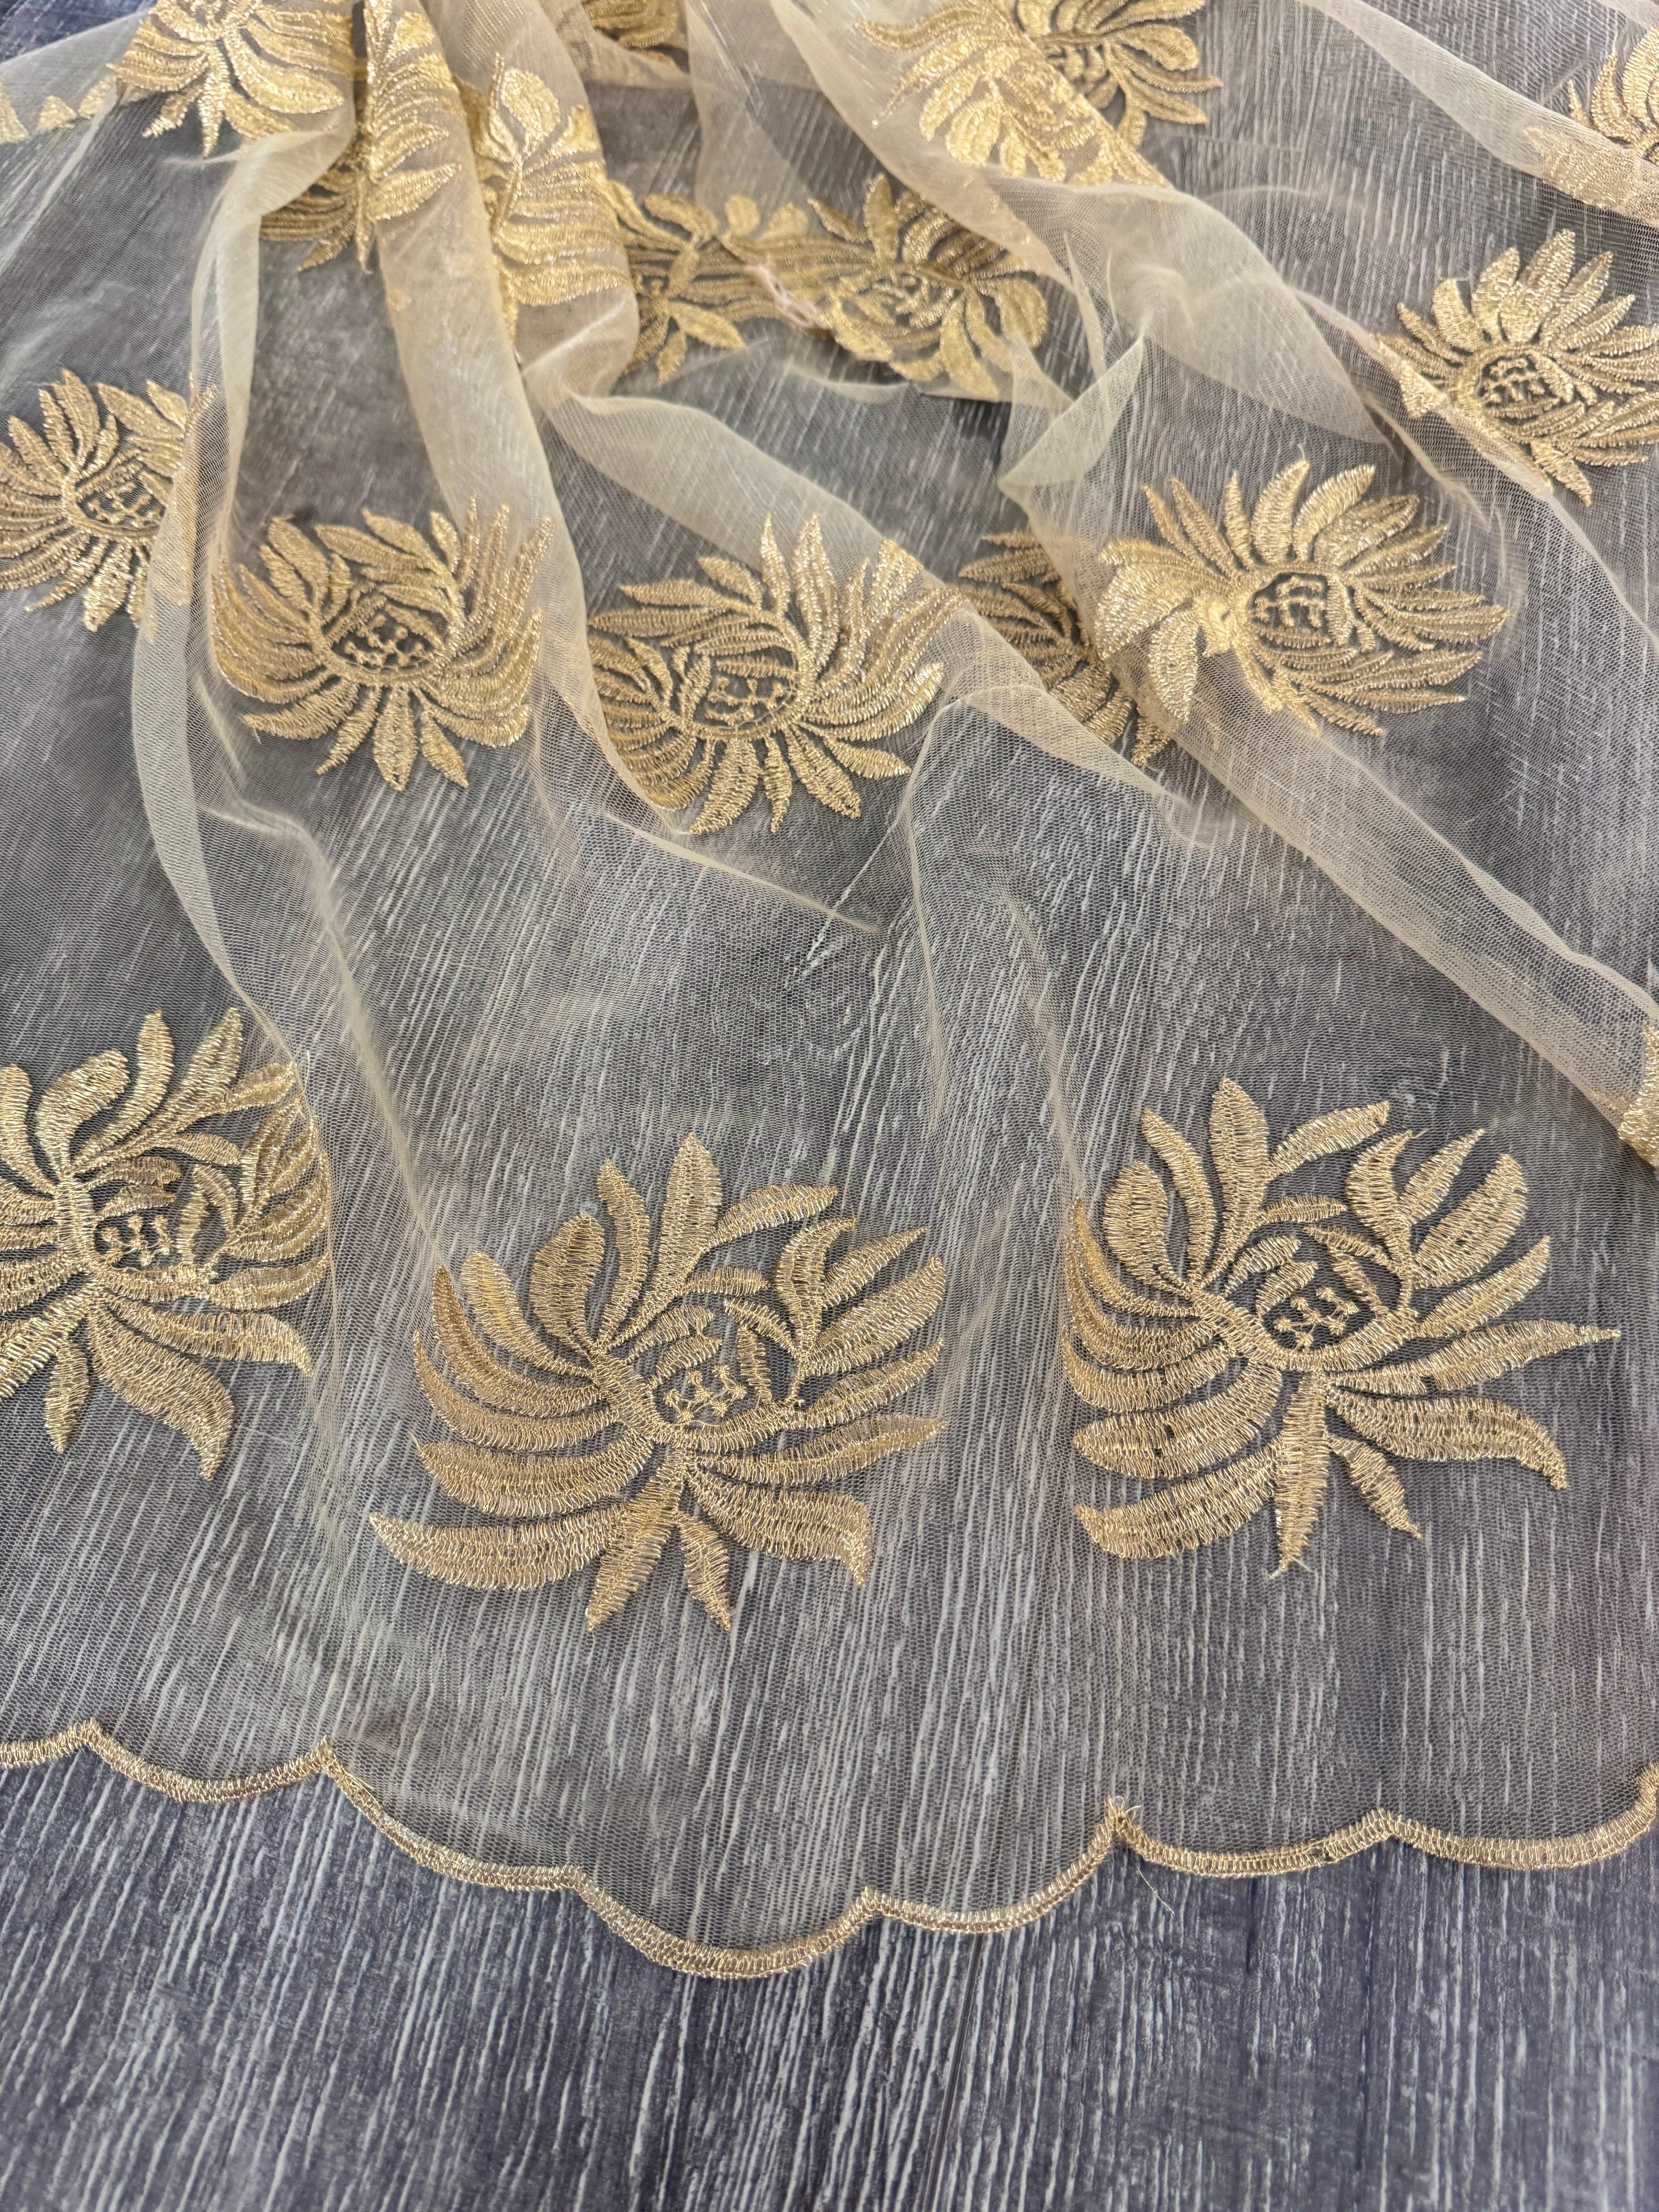 Gold Scalloped Floral Embroidered Lace, dark gold Scalloped Floral Embroidered Lace, light gold Scalloped Floral Embroidered Lace, Scalloped Floral Embroidered Lace for woman,Scalloped Floral Embroidered Lace for bride, Scalloped Floral Embroidered Lace on discount